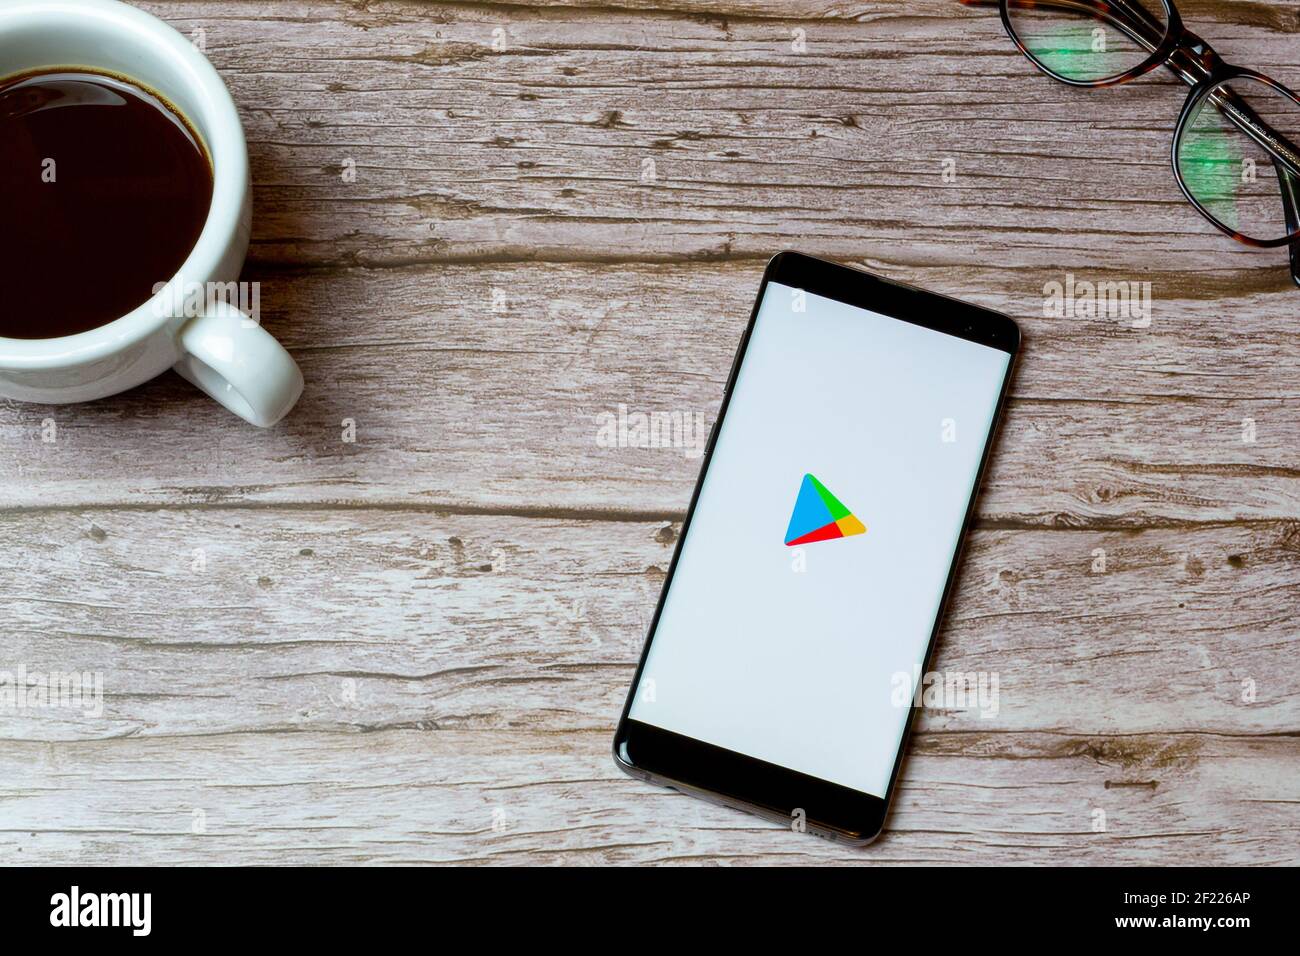 A Mobile phone or cell phone laid on a table or desk with the Google play store app open and a coffee next to it Stock Photo